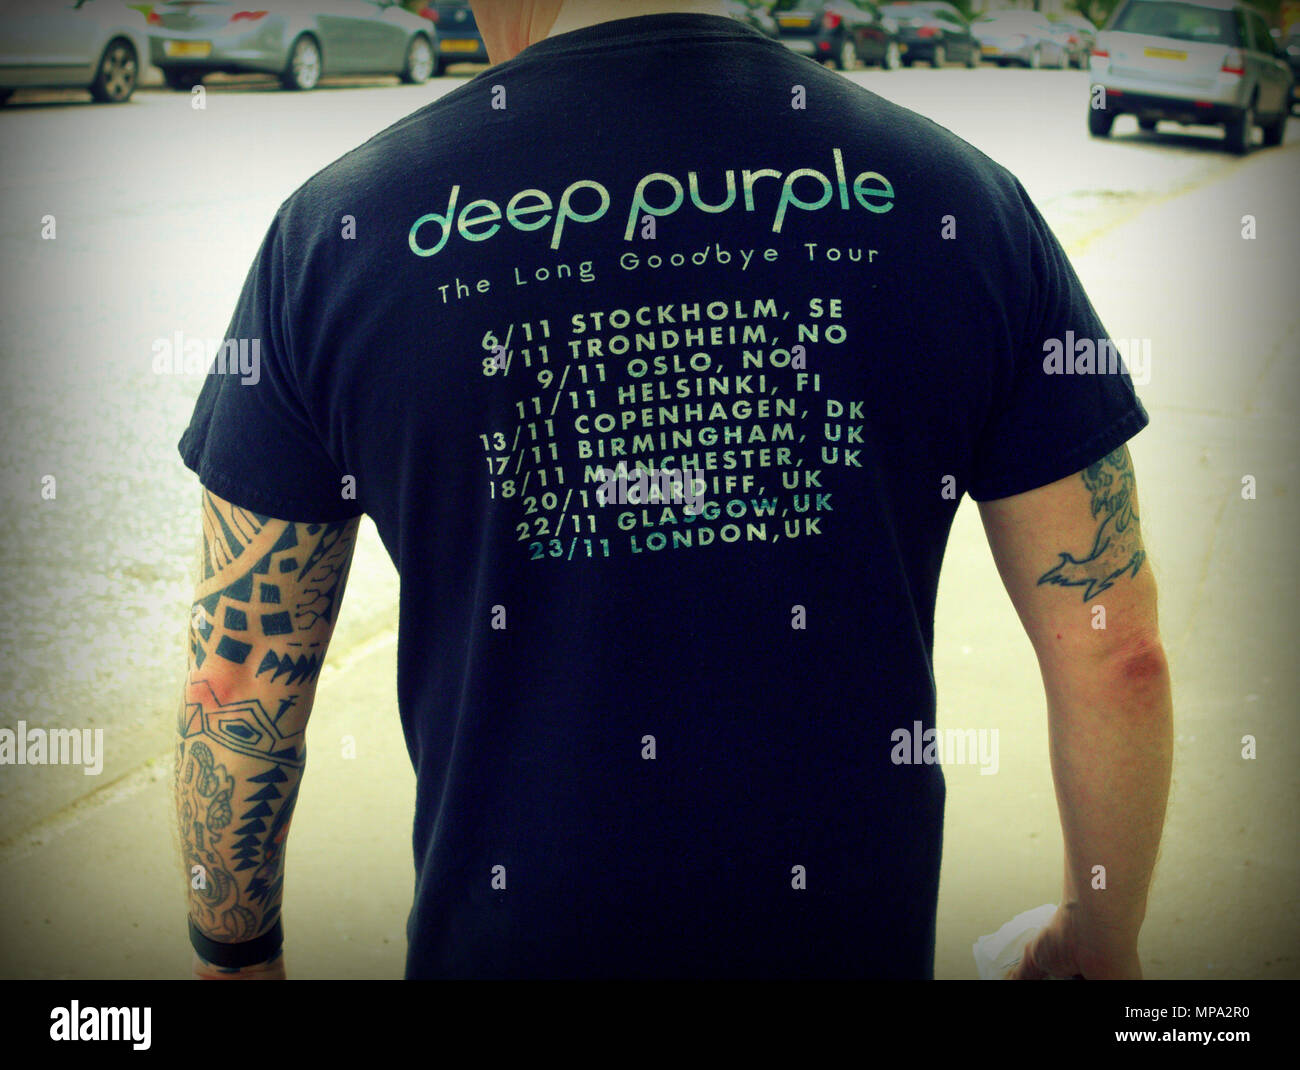 deep purple the long goodbye tour t shirt with fan tattoos viewed from behind Stock Photo